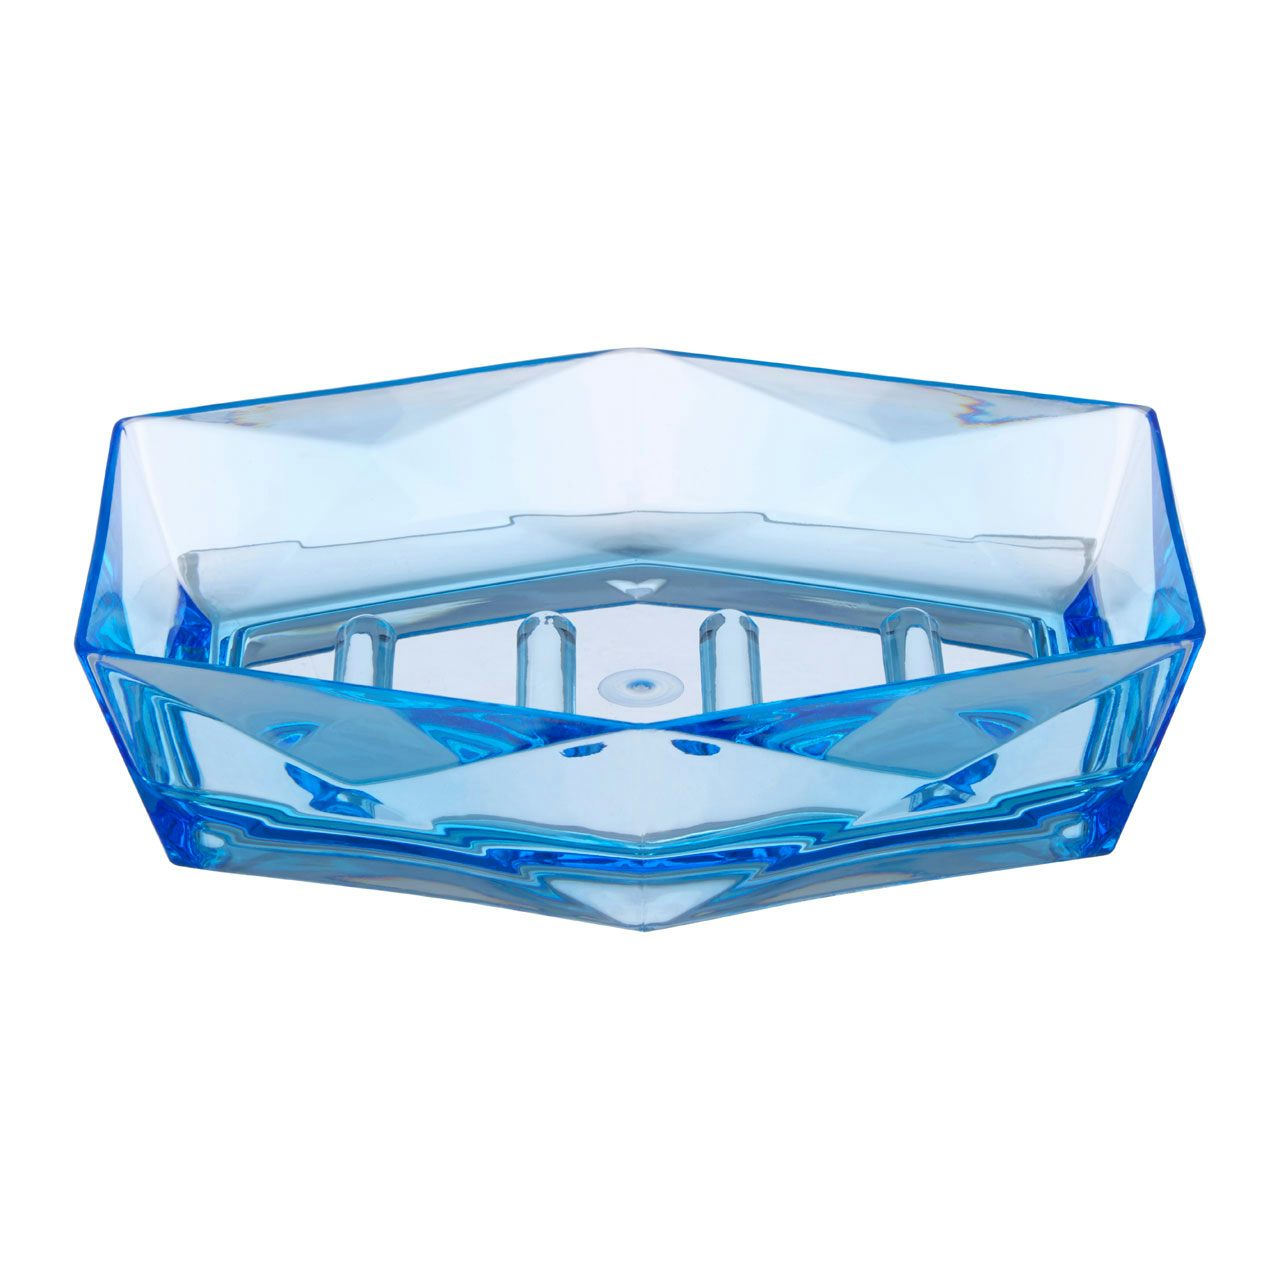 Accents Dow blue acrylic soap dish